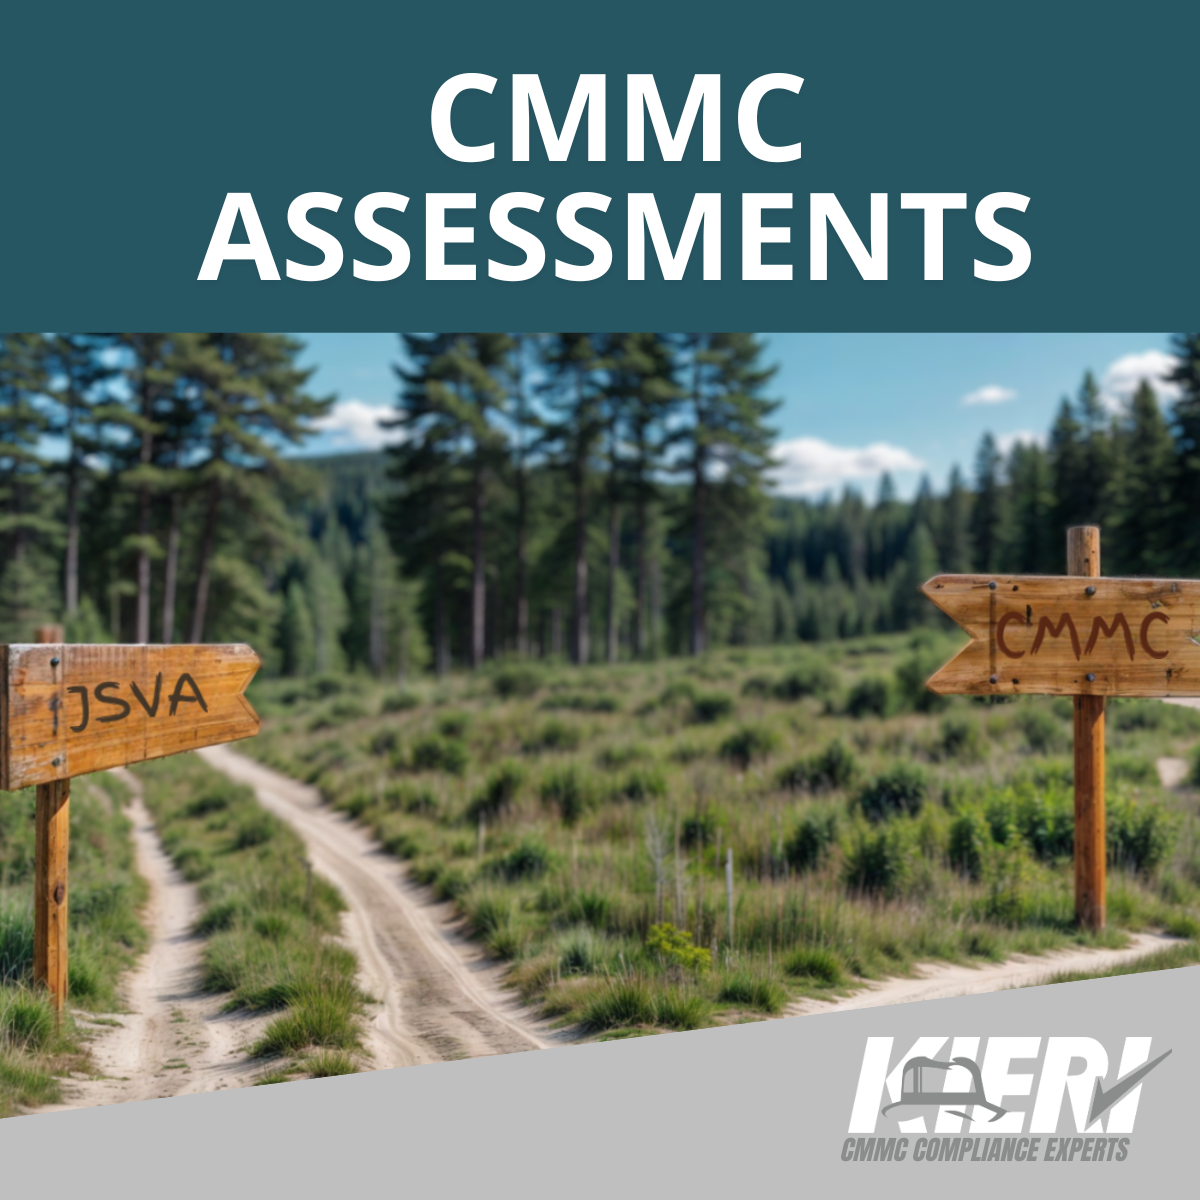 CMMC Level 2 and 800-171 Assessments and Gap Analysis